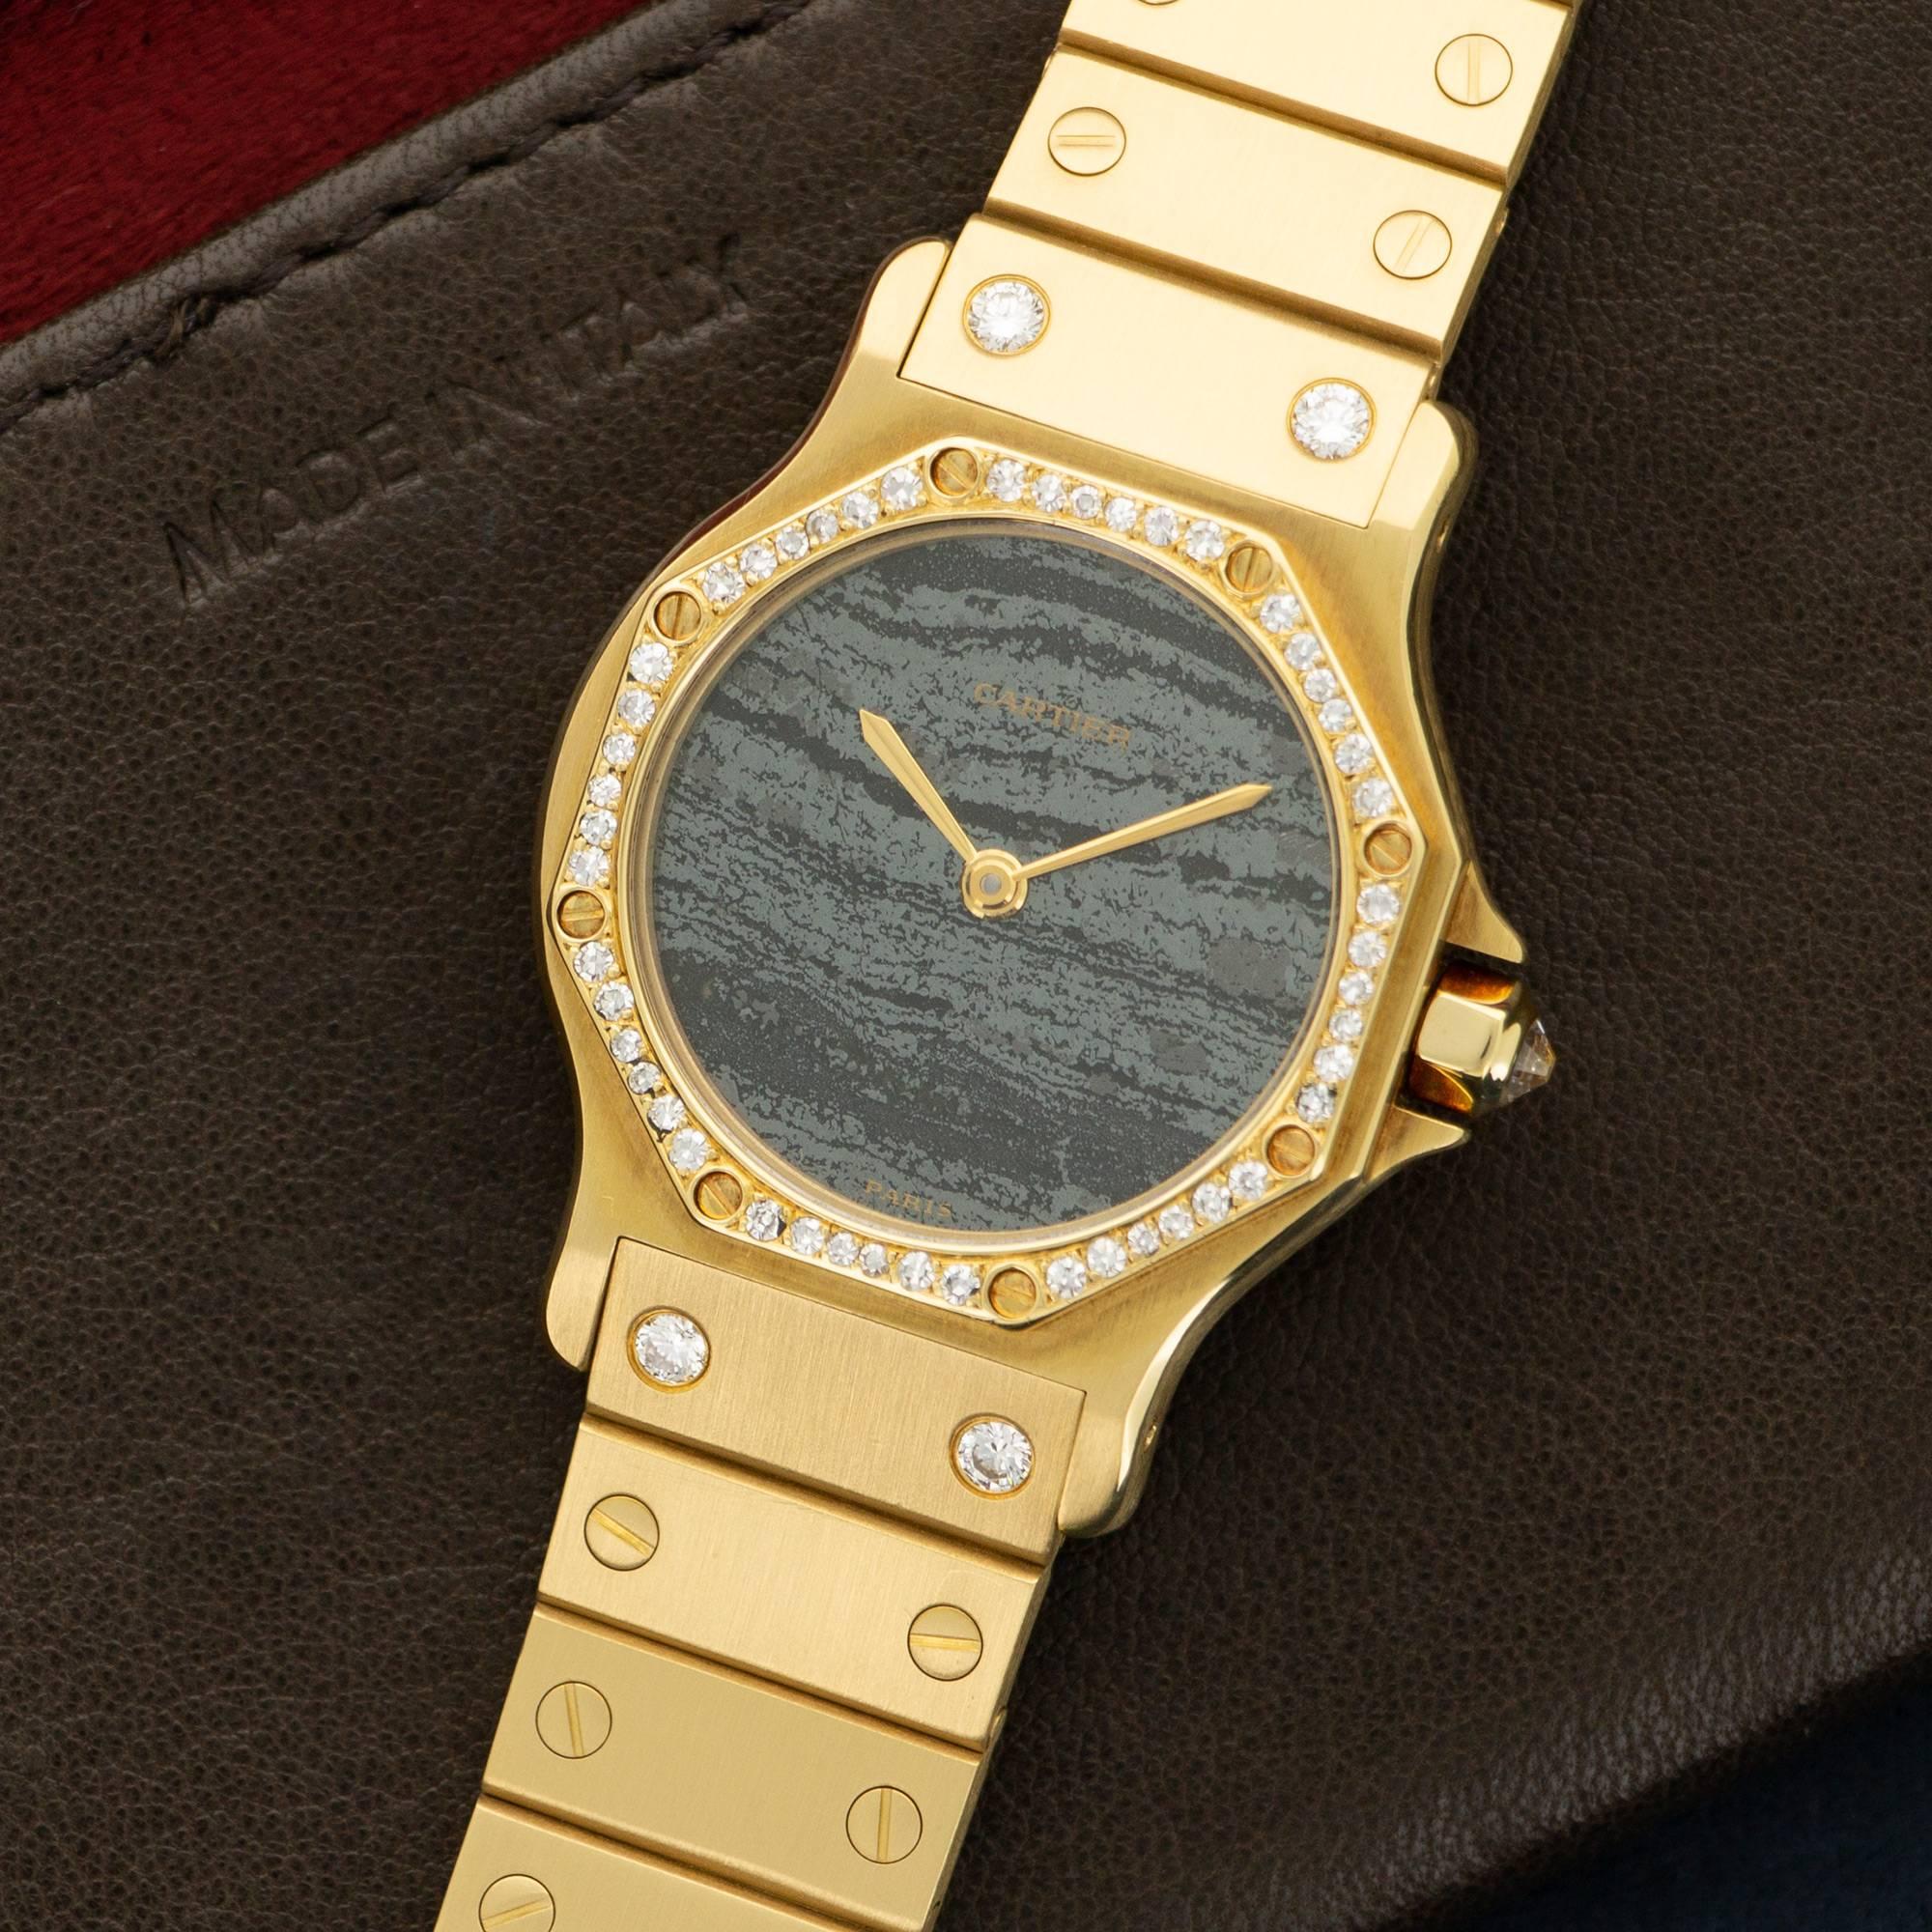 A Rare and Unique 18k Yellow Gold Santos Octagonal Watch by Cartier, Circa Mid 1980's. Original Diamond Bezel and End Links. Grey Aventurine Dial with Gold Hands. Automatic Movement. 32 mm Case Diameter. All Original .